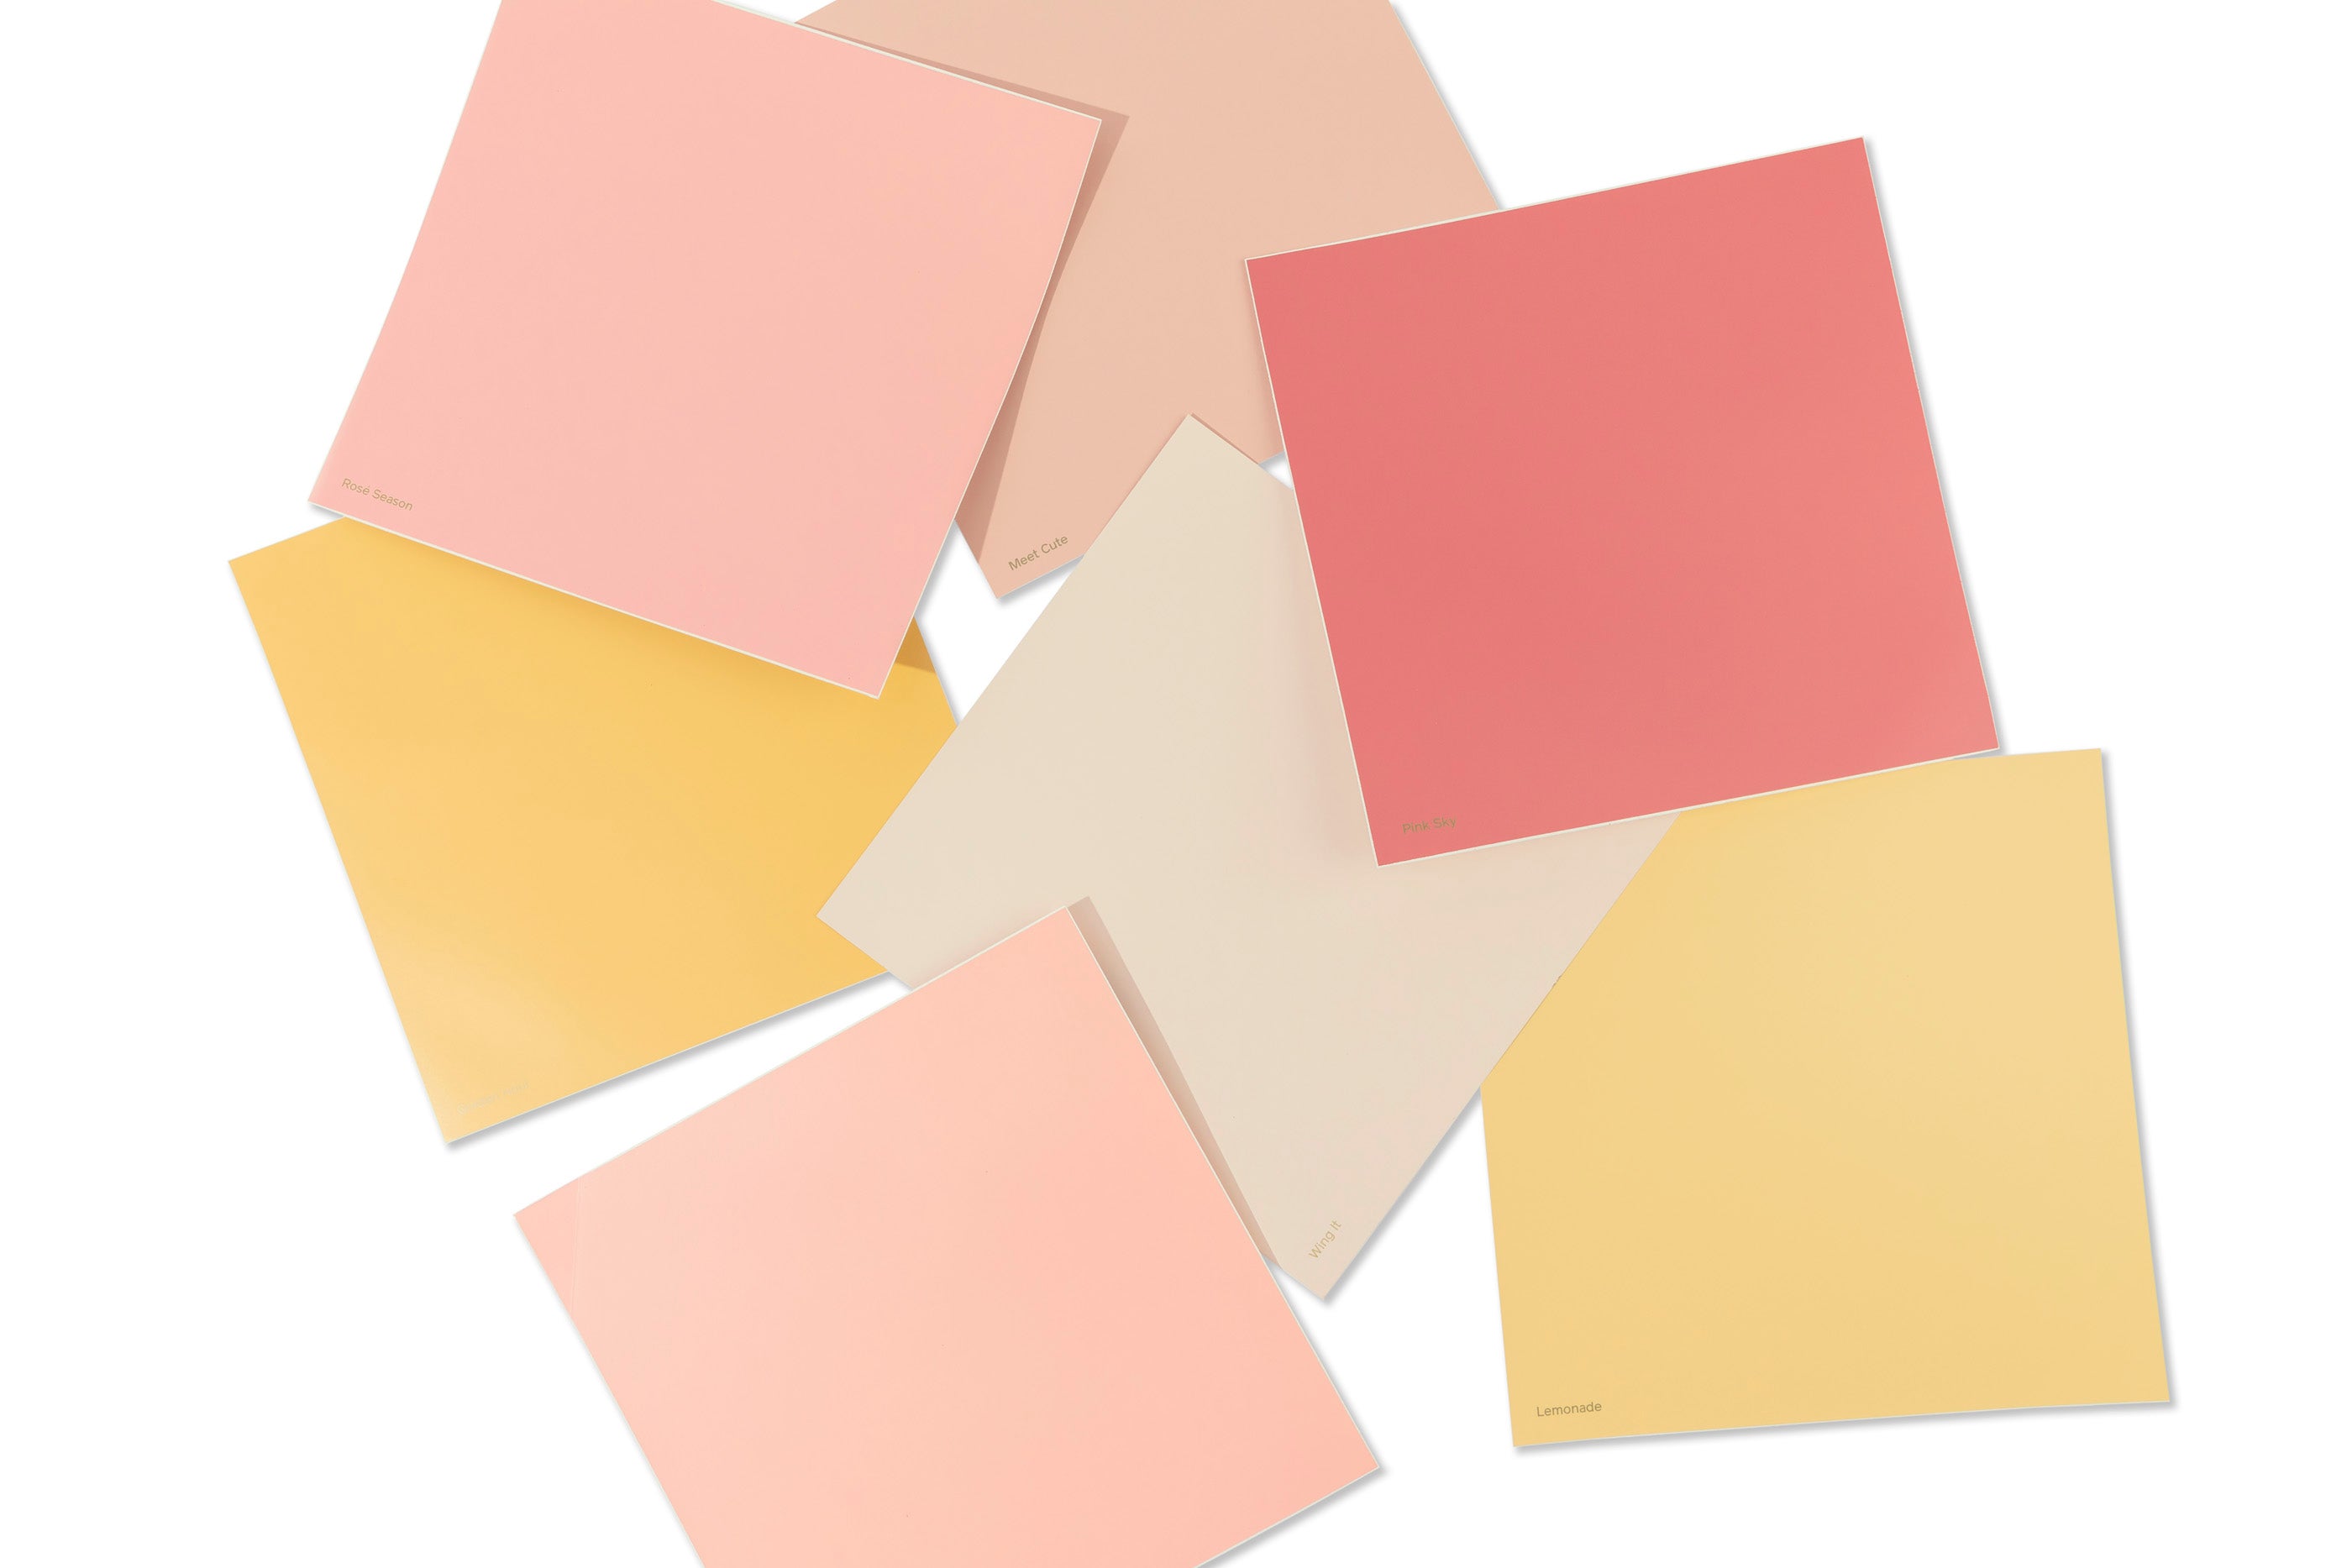 These curated paint sample palettes feature our most popular color samples in one convenient kit. Just peel, stick & compare our fan-fave shades in your space!